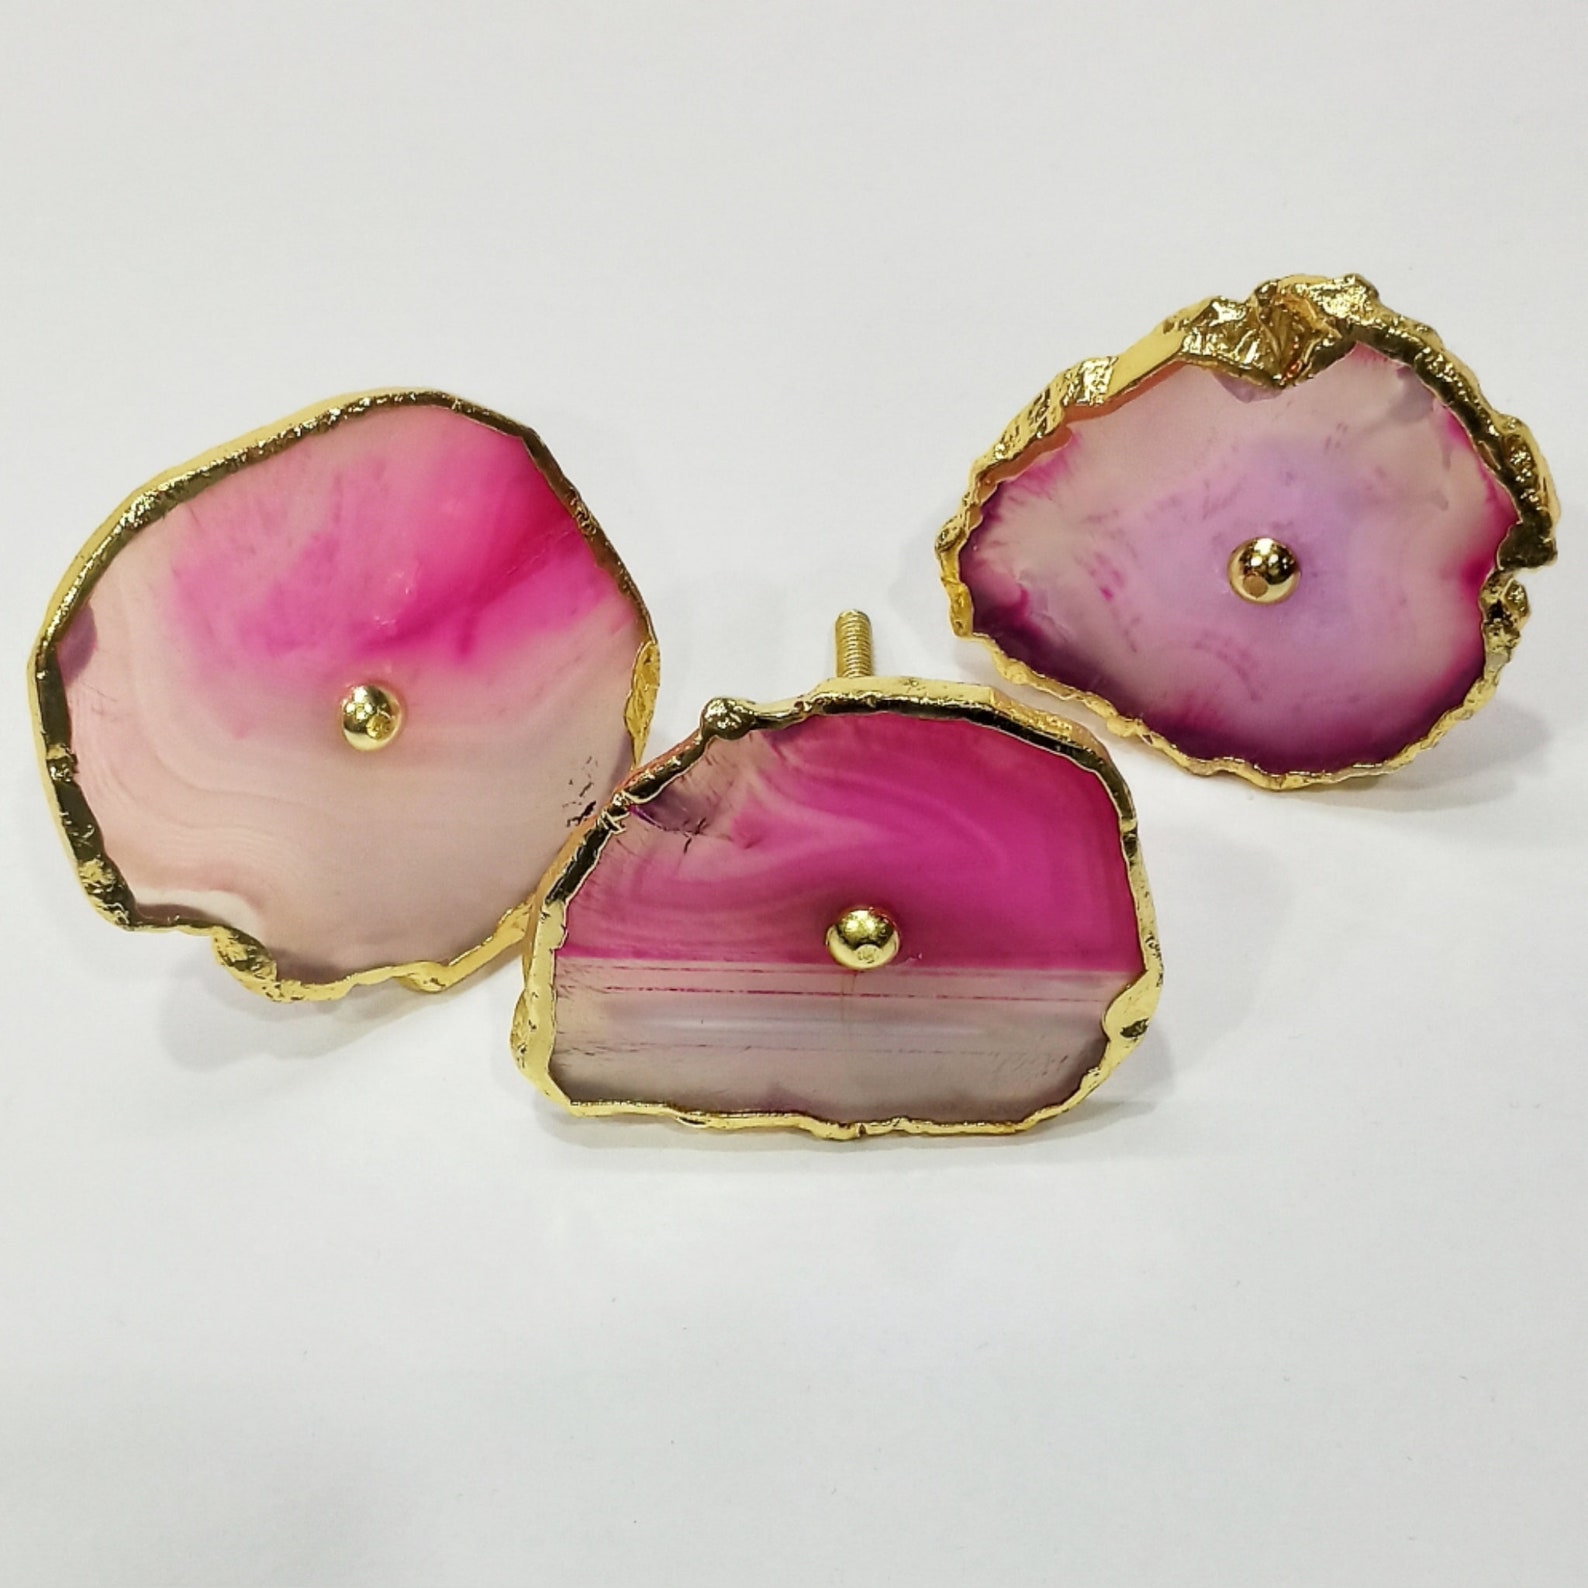 Decorative Solid Pink Agate Knobs, Drawer Pulls, Fancy Agate Knobs ...